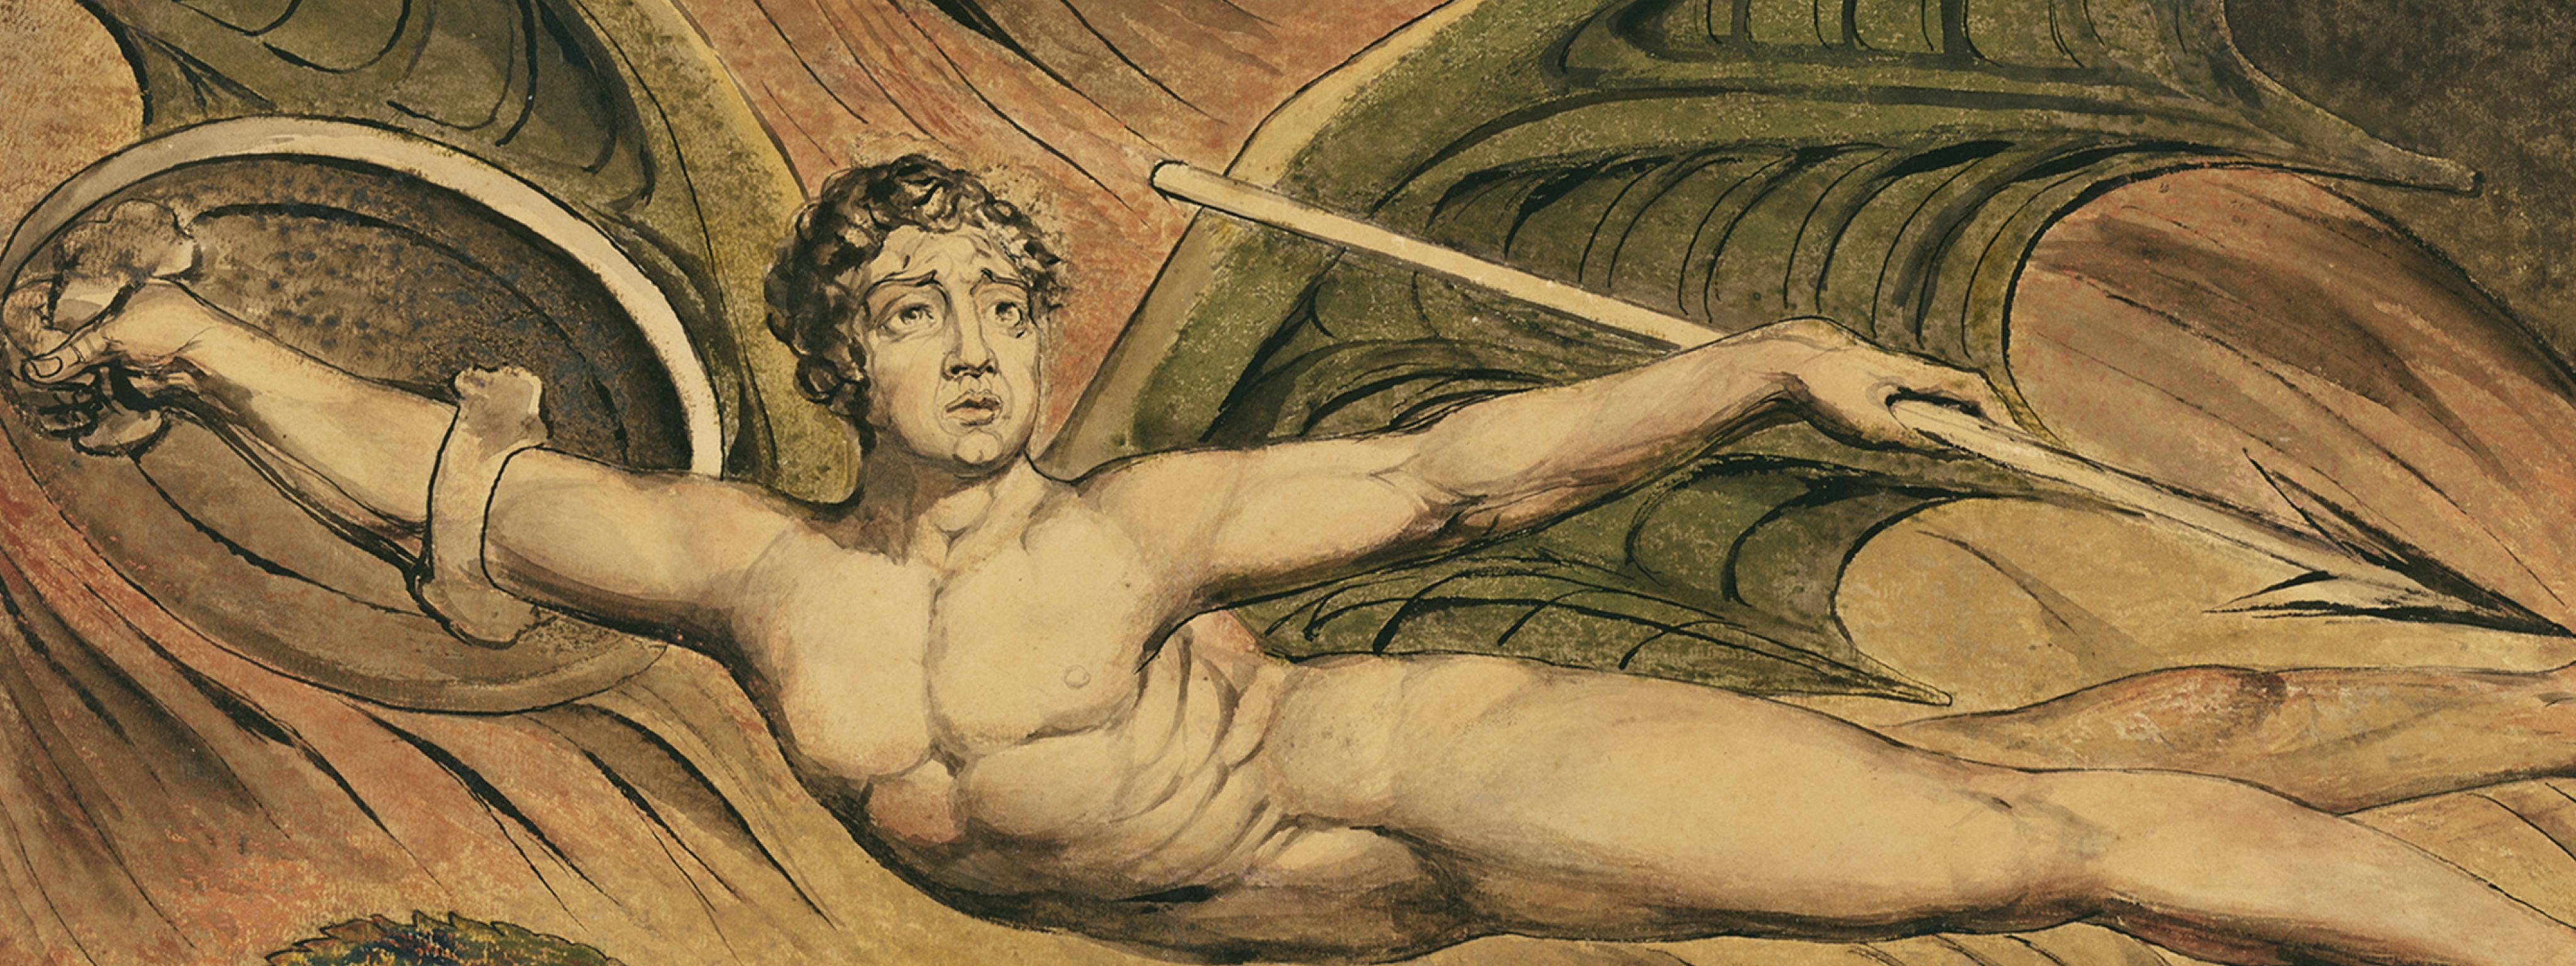 Satan Exulting over Eve (detail), 1795, William Blake. Color print with graphite, pen and black ink, and watercolor. Getty Museum